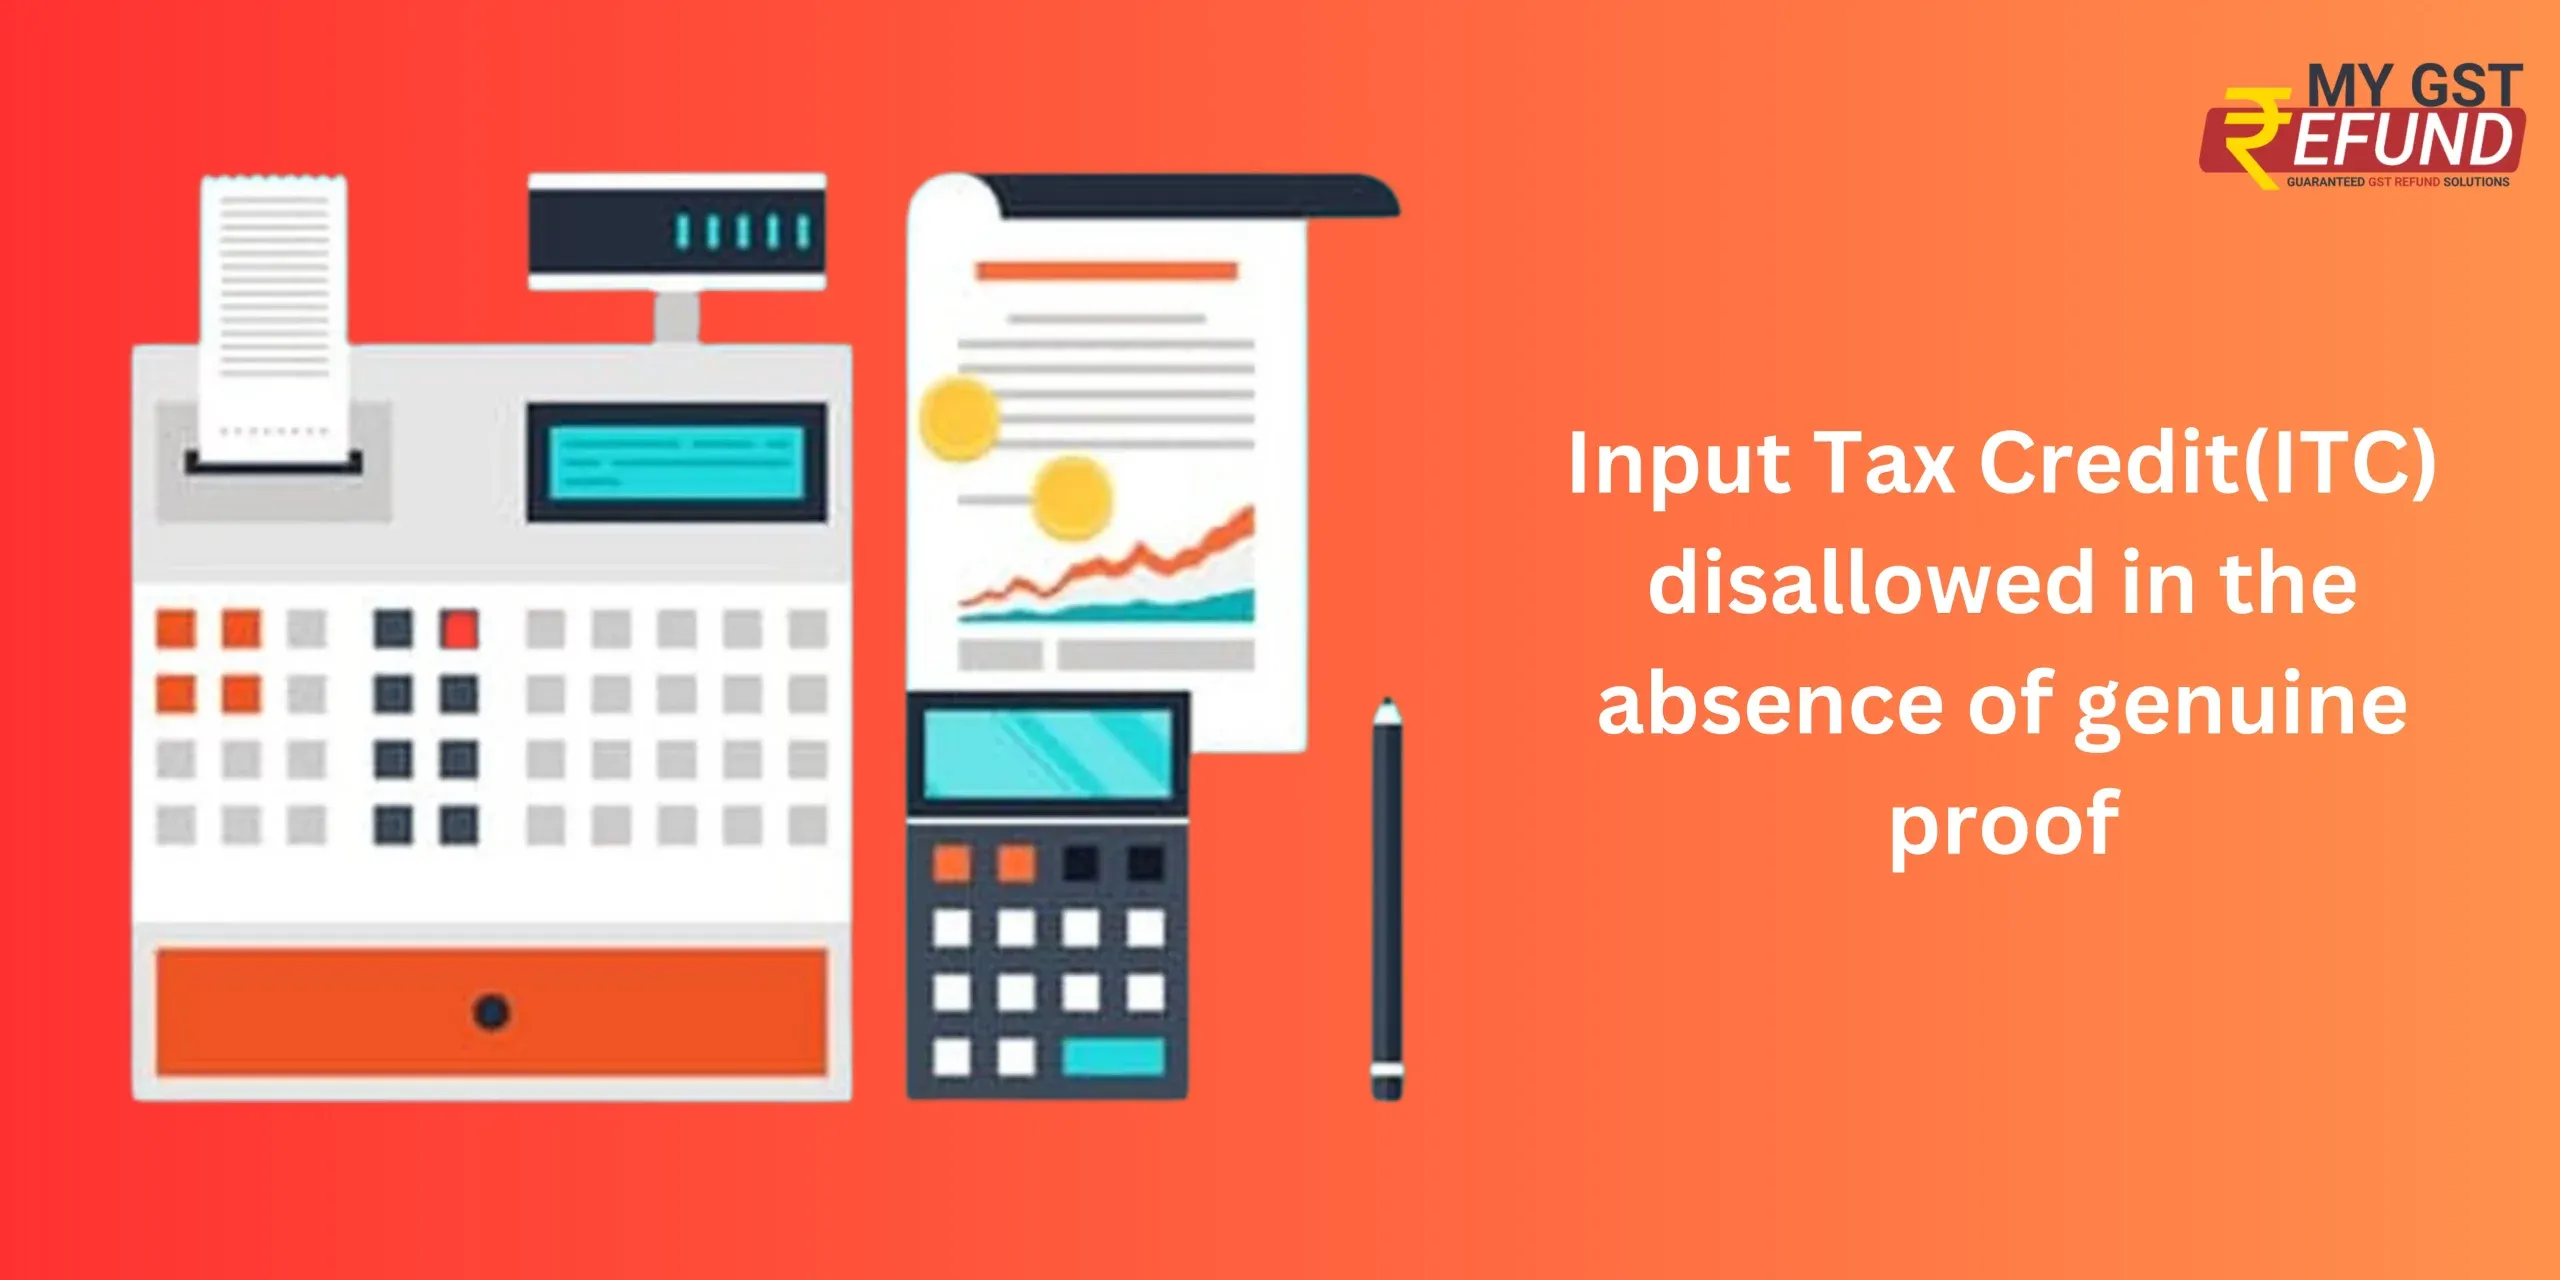 Input Tax Credit(ITC) disallowed in the absence of genuine proof.